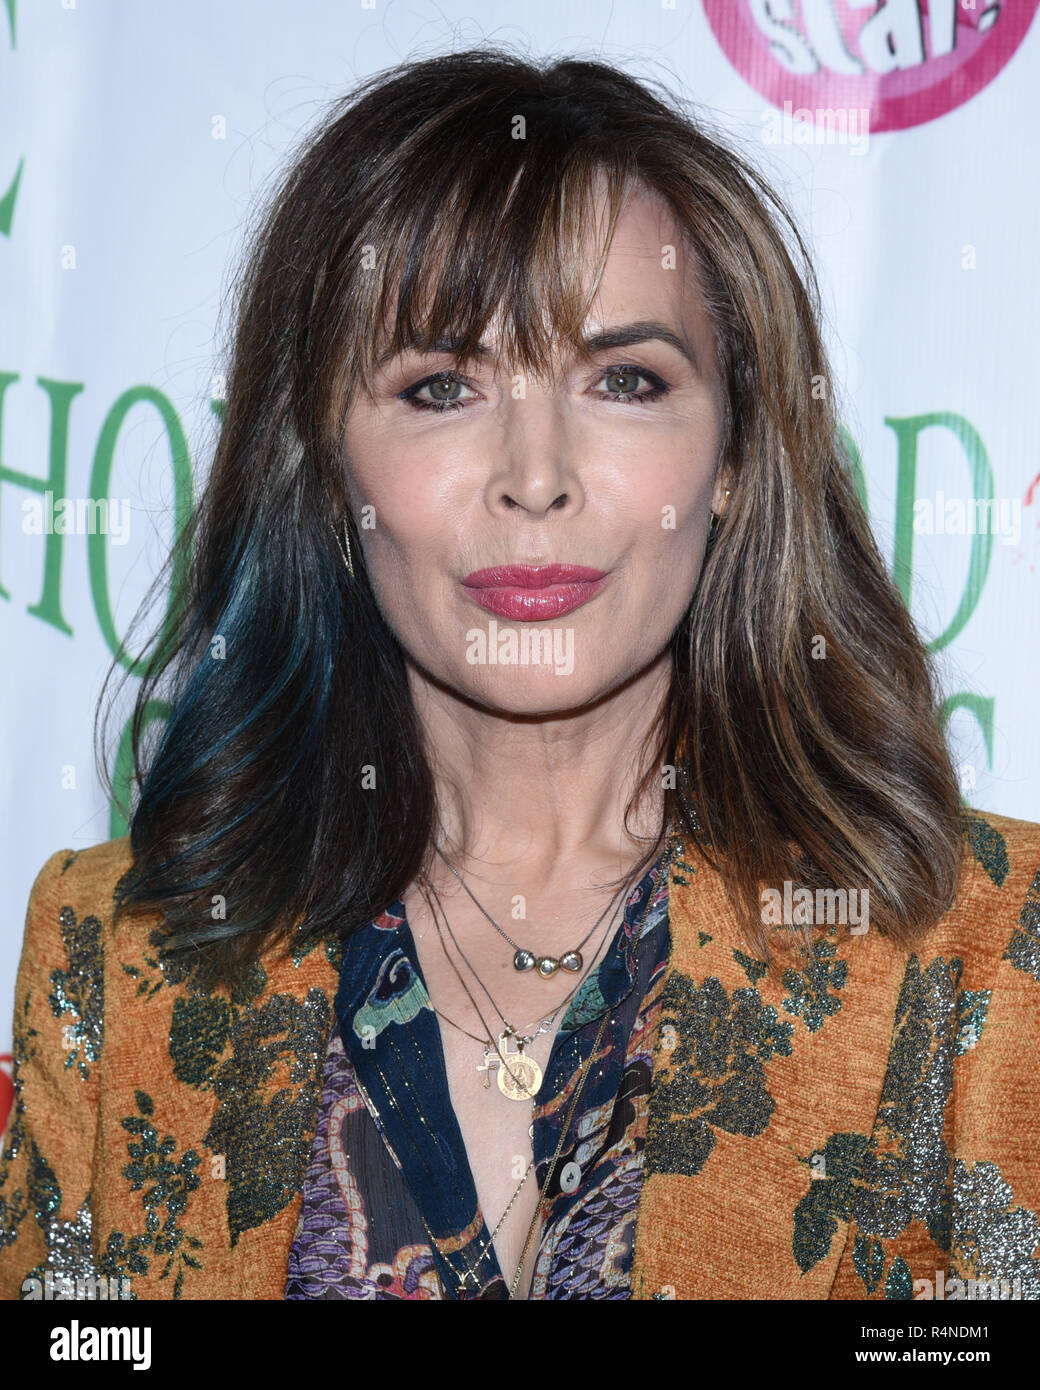 Lauren Koslow arrives at the 87th Annual Hollywood Christmas Parade in Hollywood California on November 25, 2018. Stock Photo